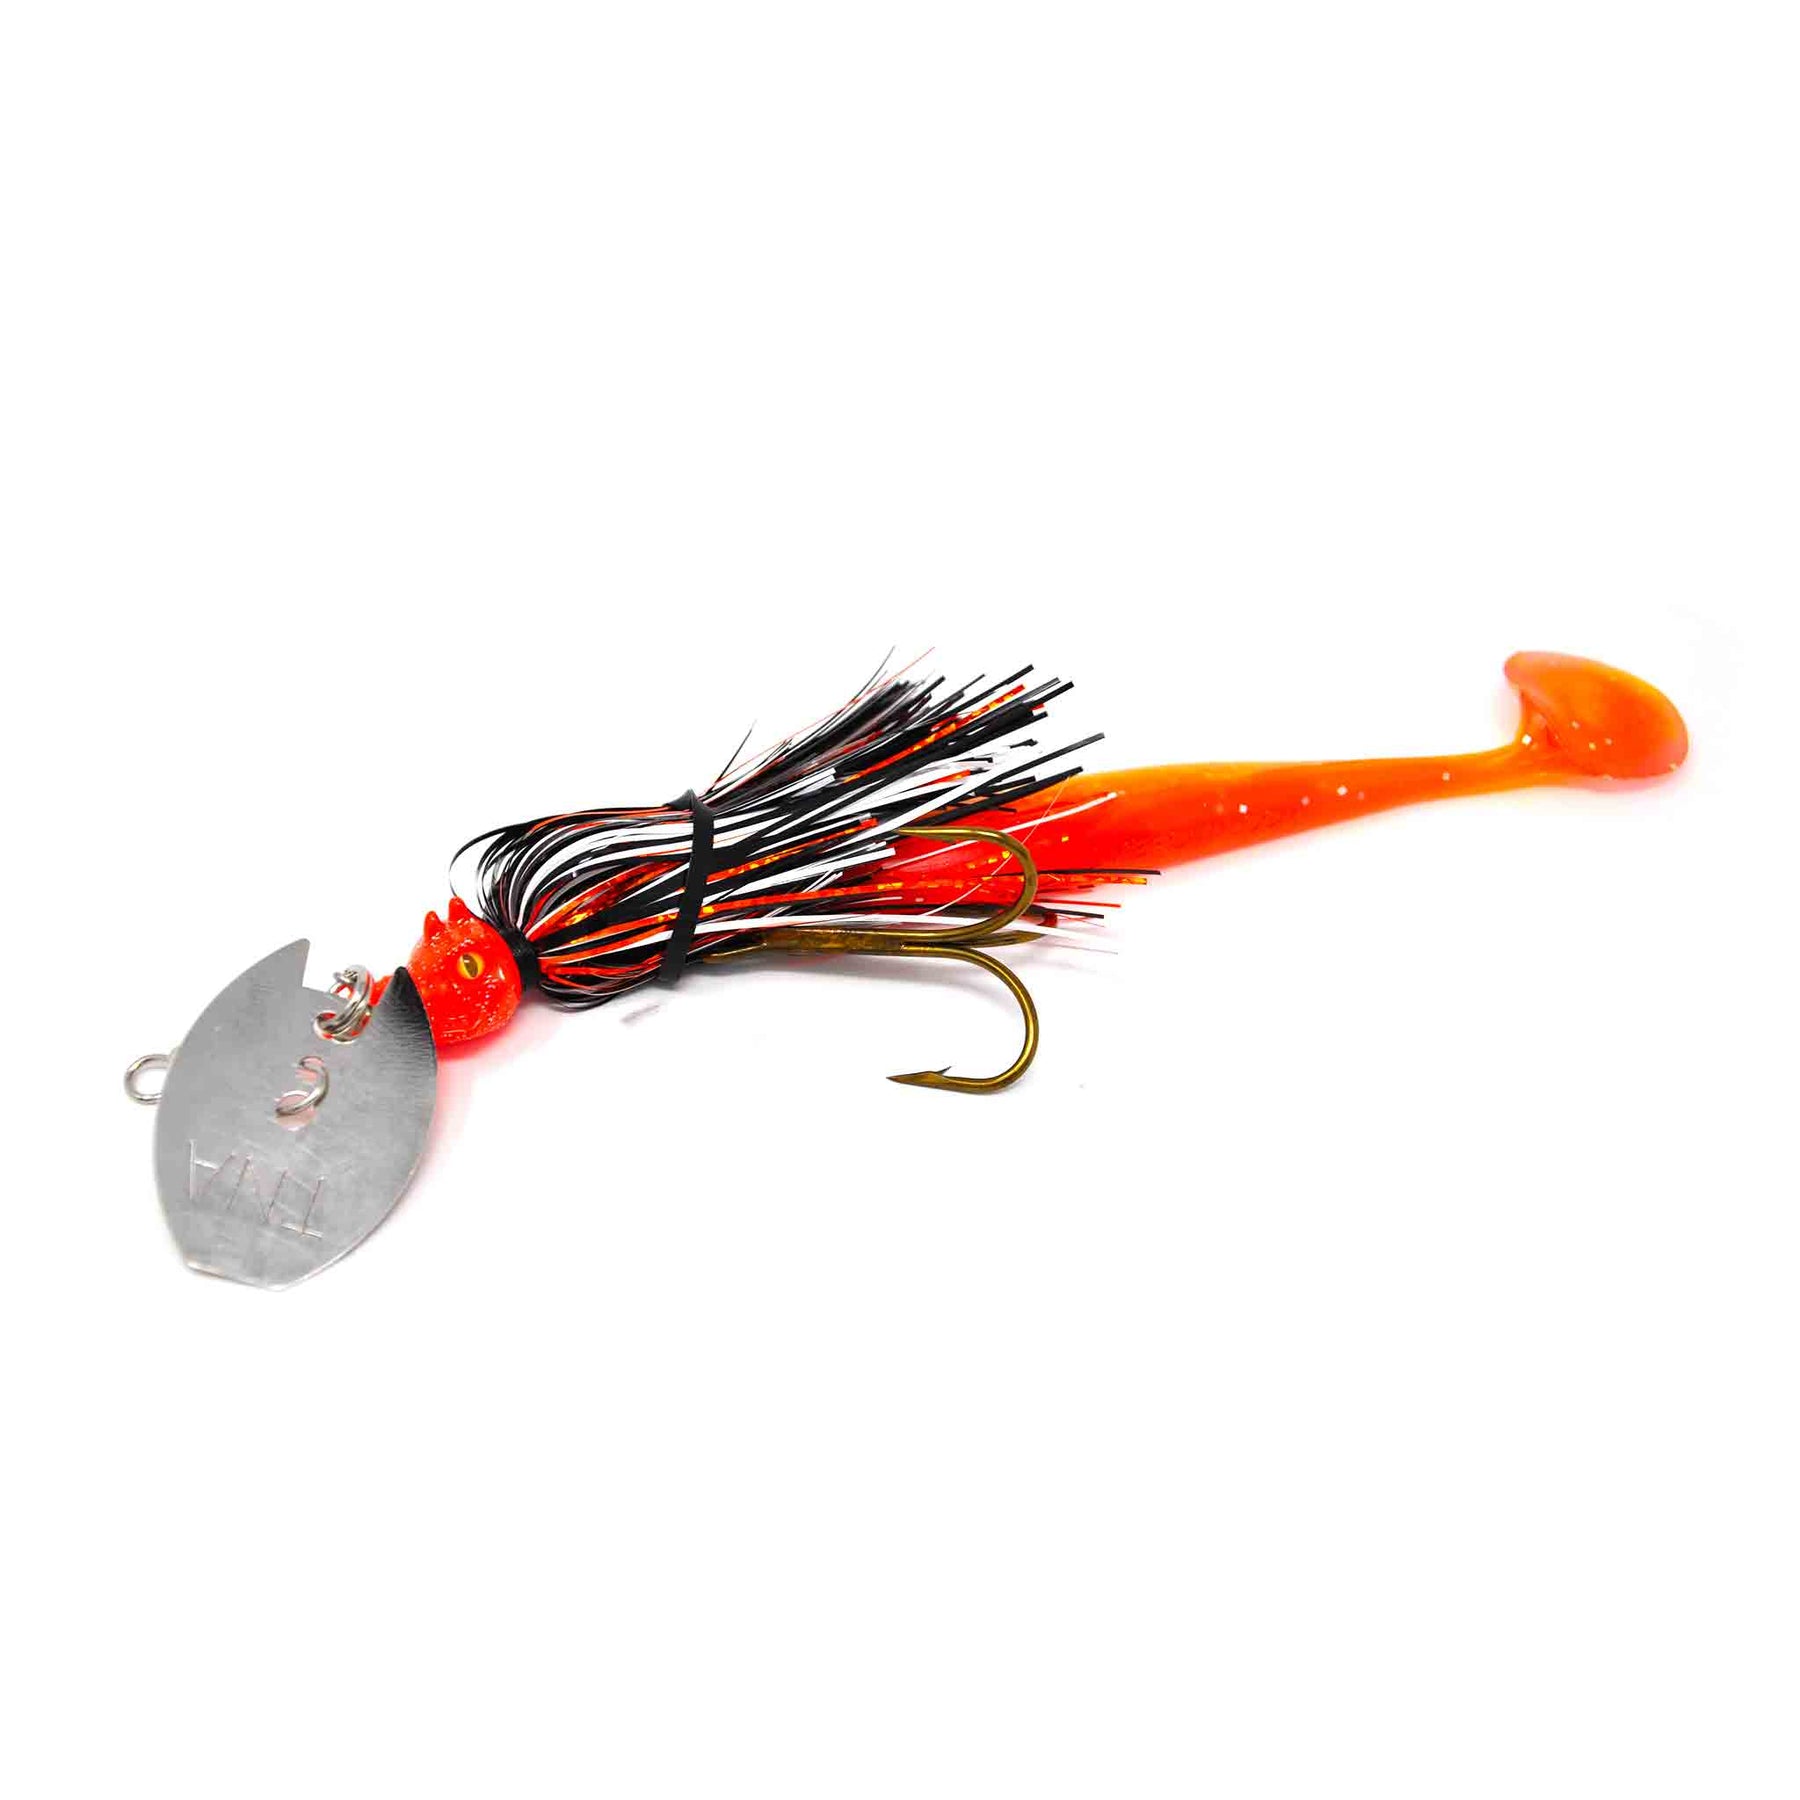 View of Chatterbaits TnA Tackle Micro Waggin Dragon Chatterbait Ball Licker available at EZOKO Pike and Musky Shop